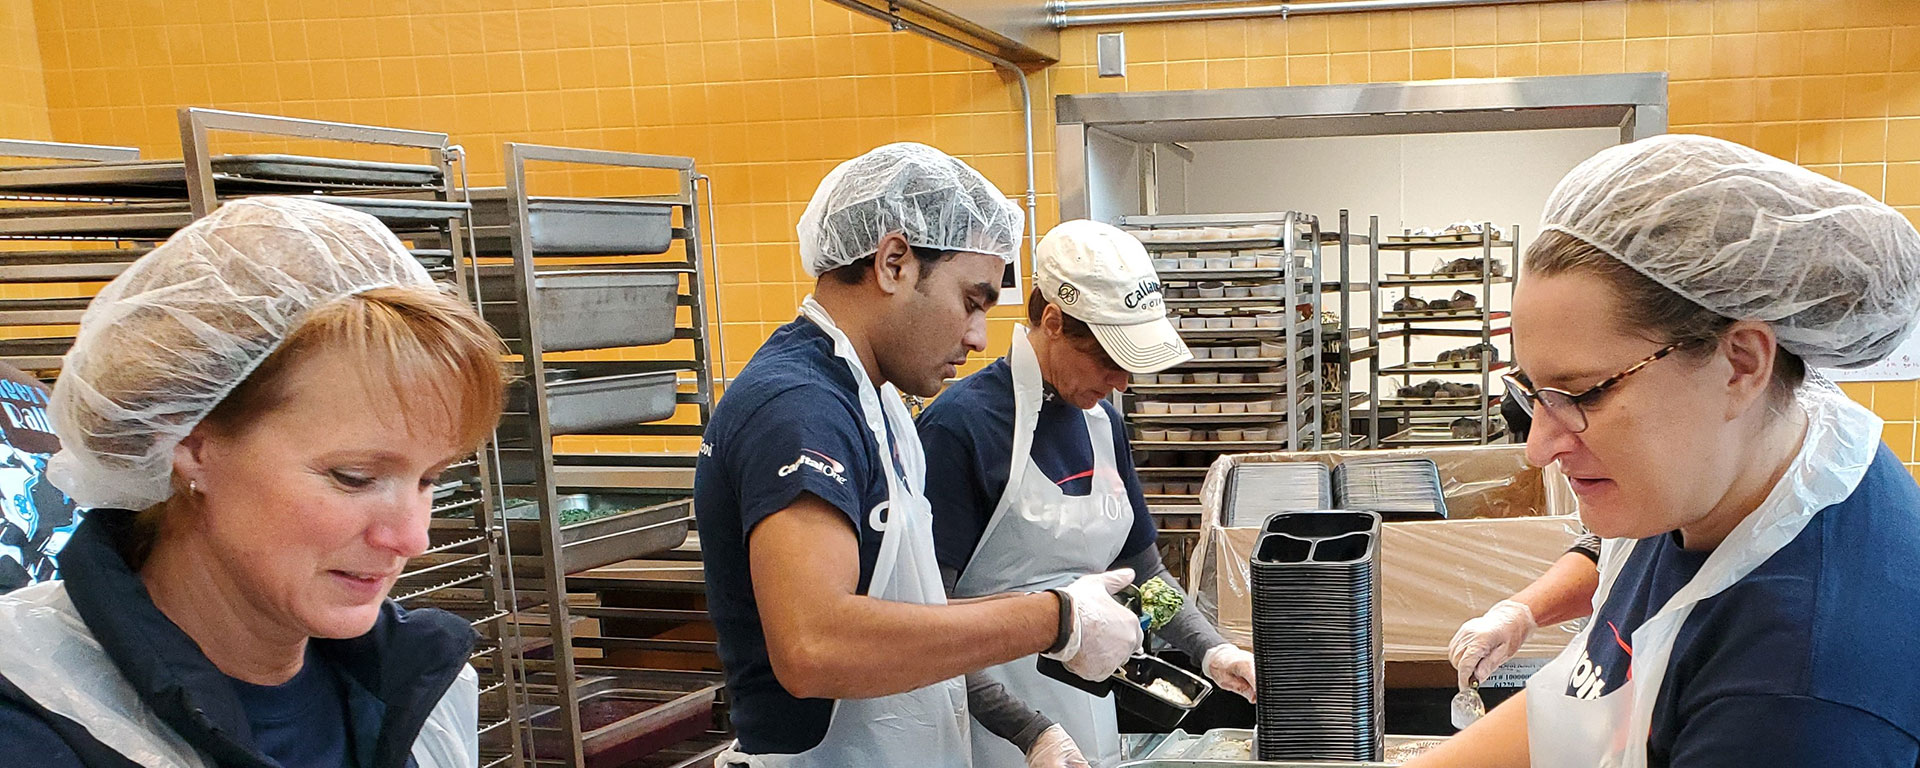 Capital One associates volunteer in their community at Feed More, a local Richmond-area food bank